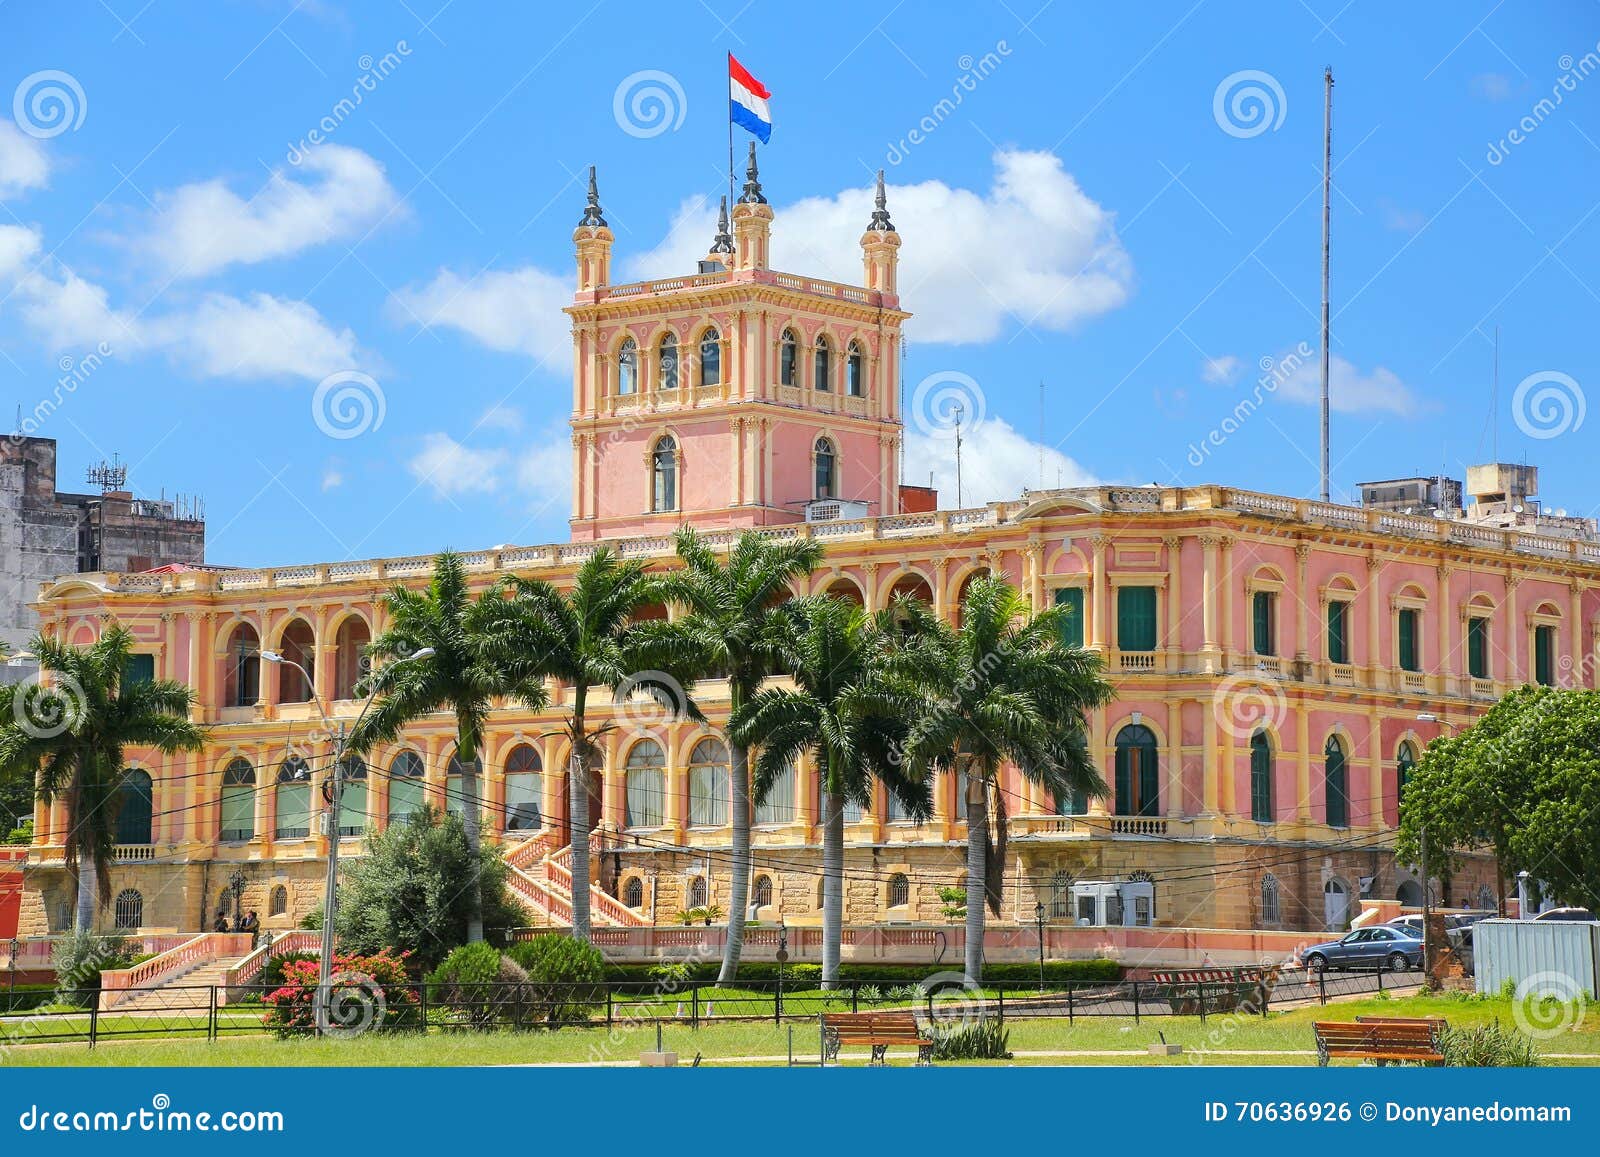 presidential palace in asuncion, paraguay